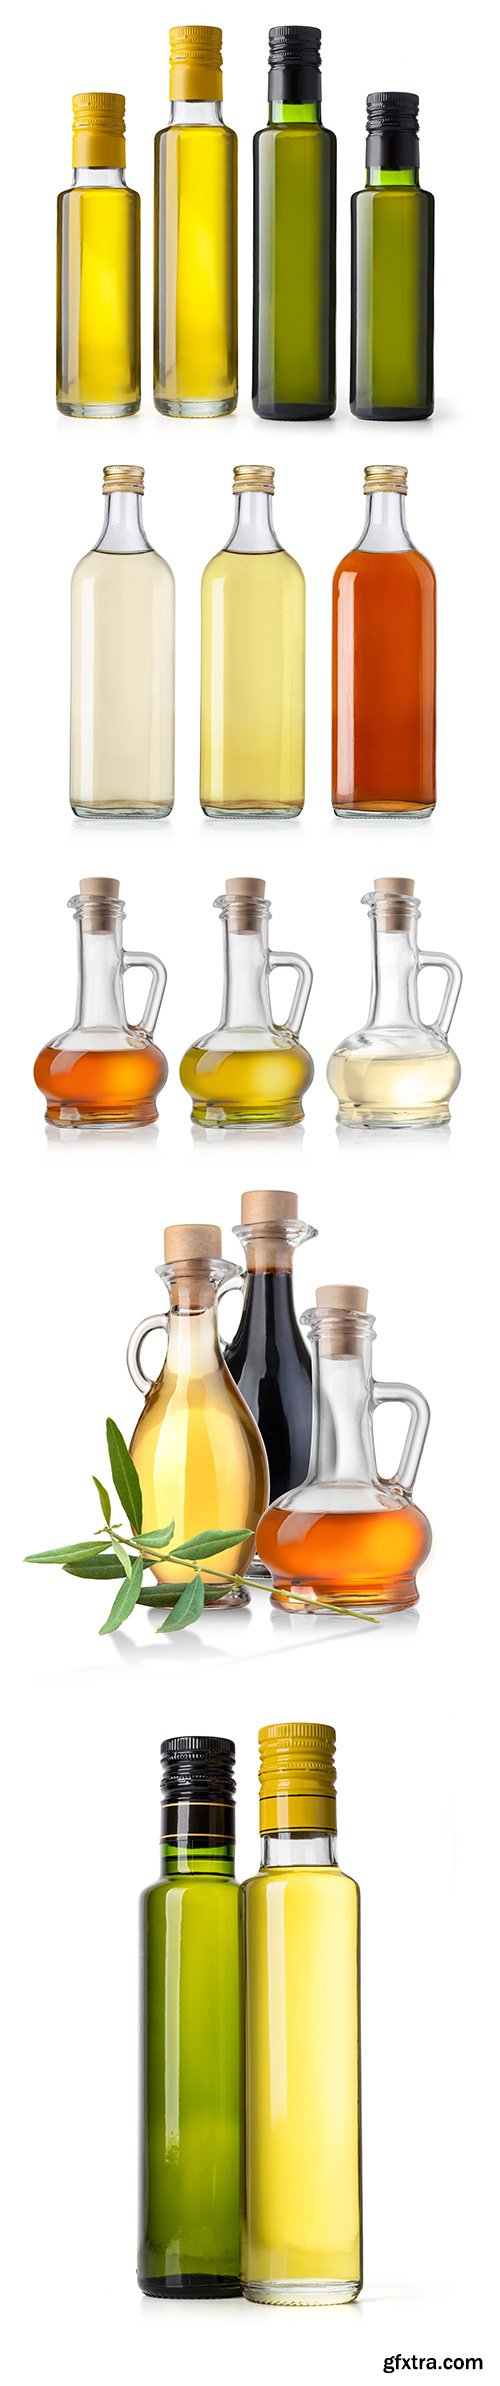 Bottle Of Olive Oil And Vinegar Isolated - 10xJPGs